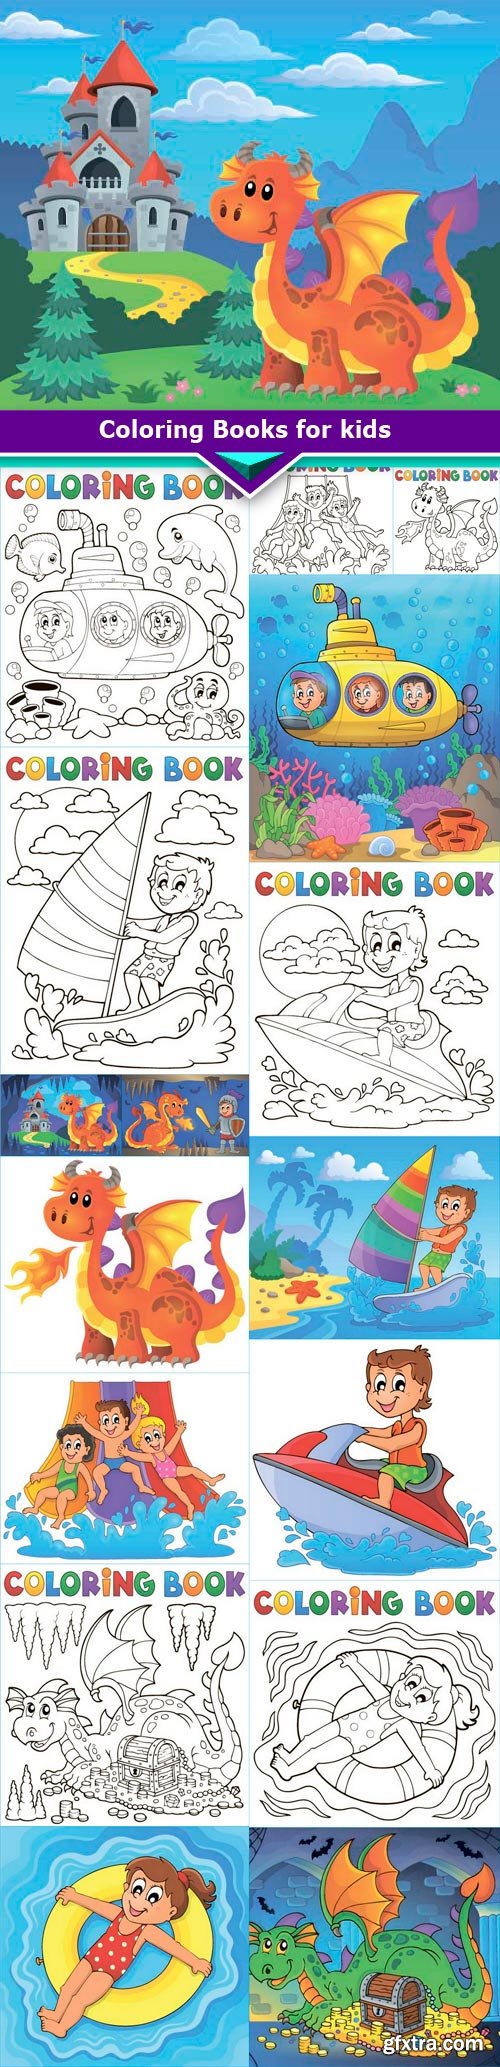 Coloring Books for kids 17x EPS